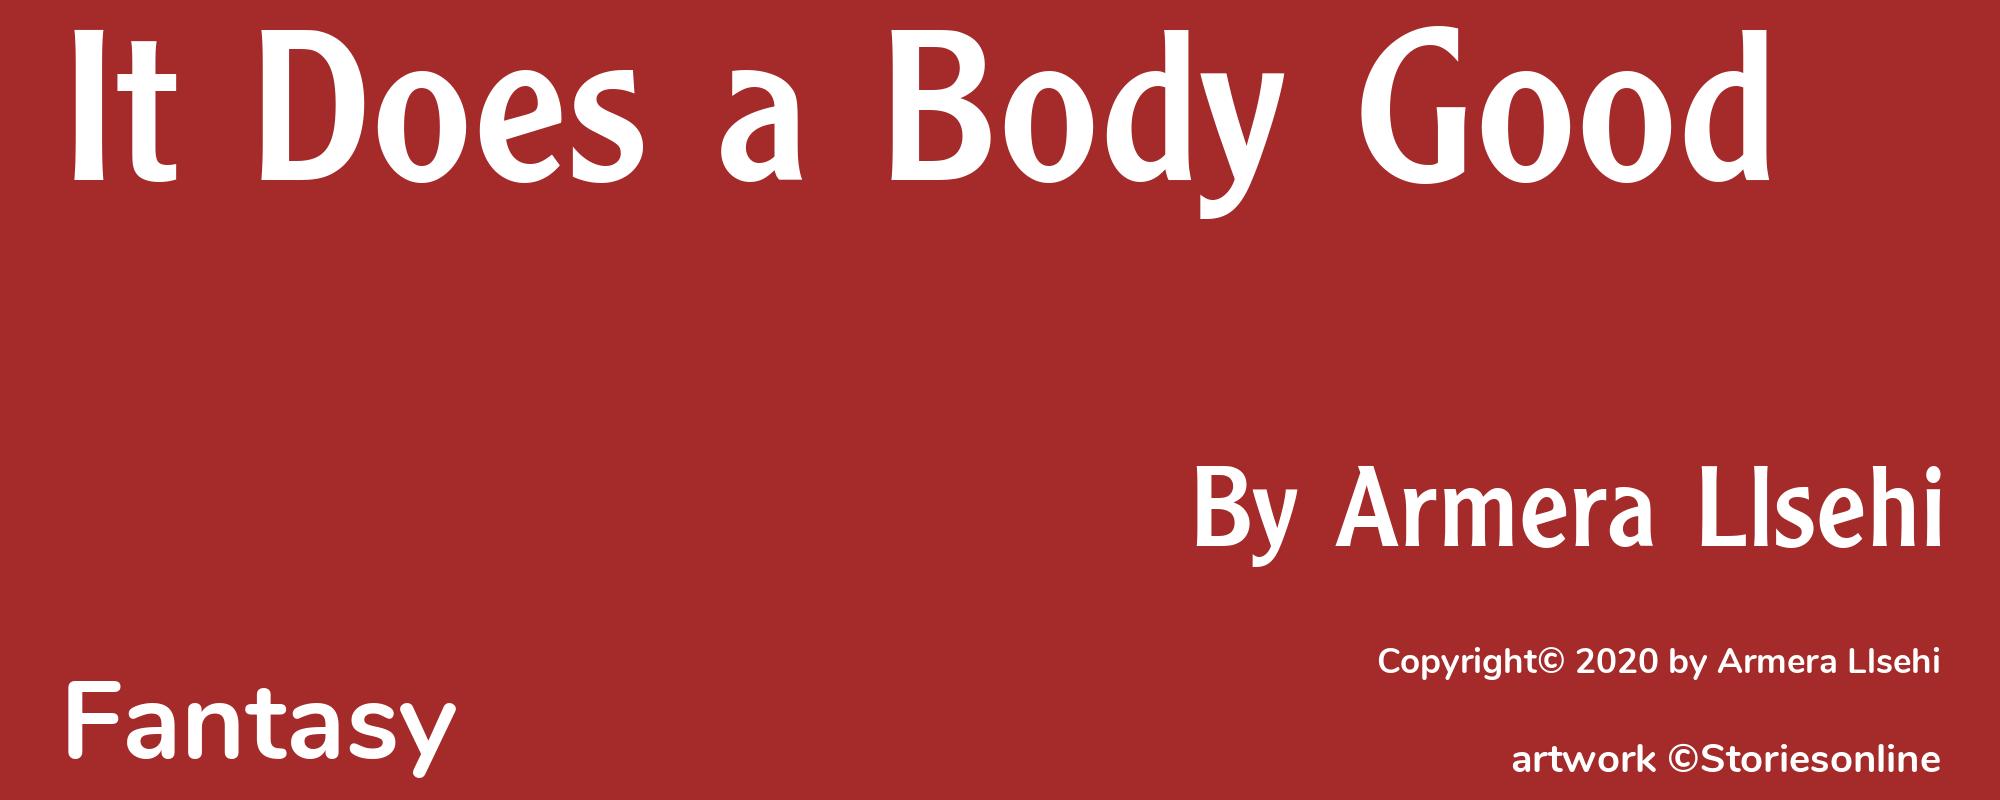 It Does a Body Good - Cover